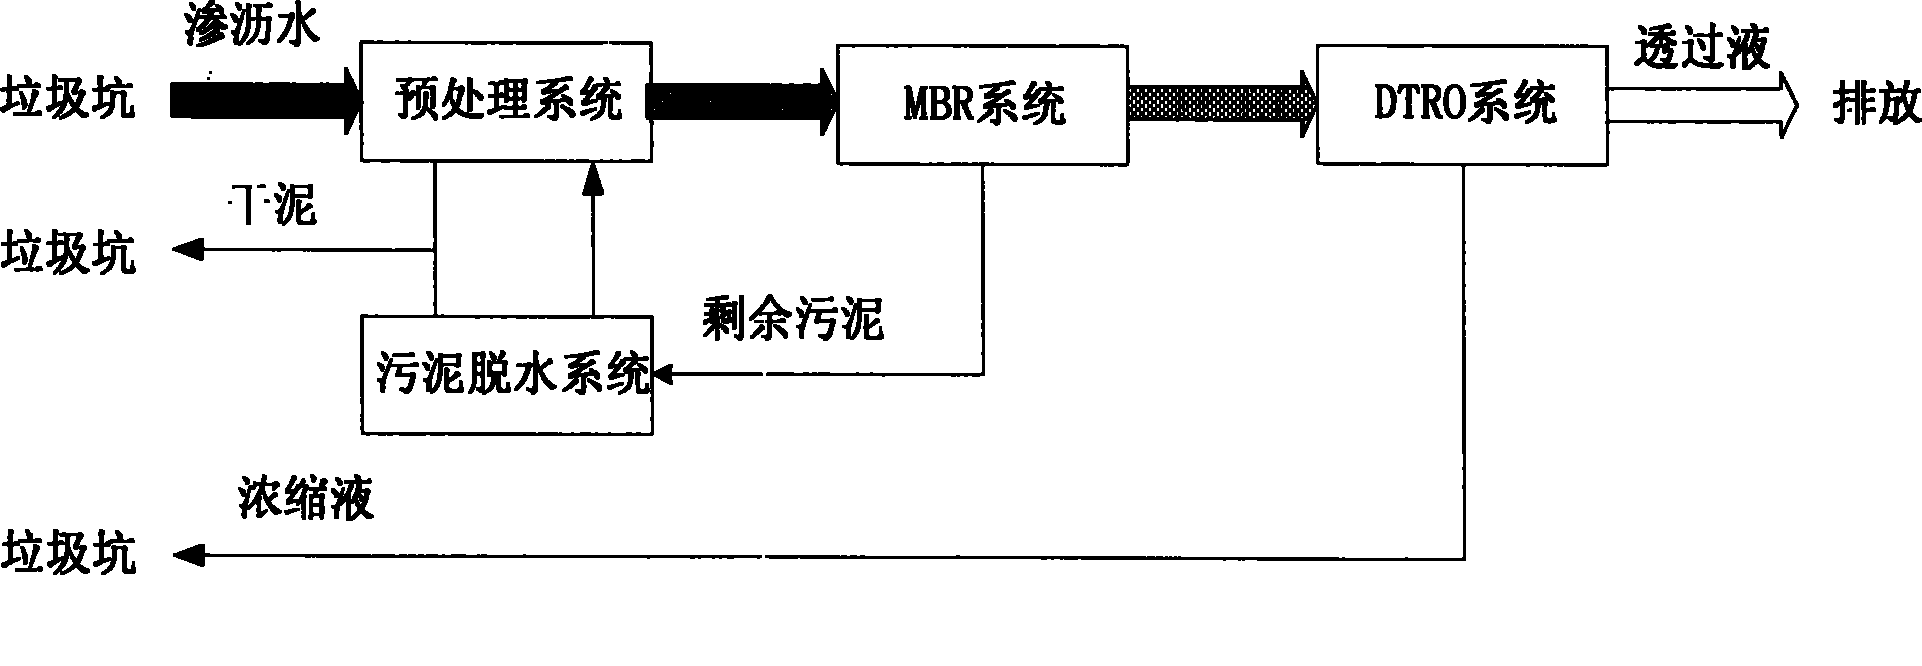 System for processing leachate of garbage burning factory